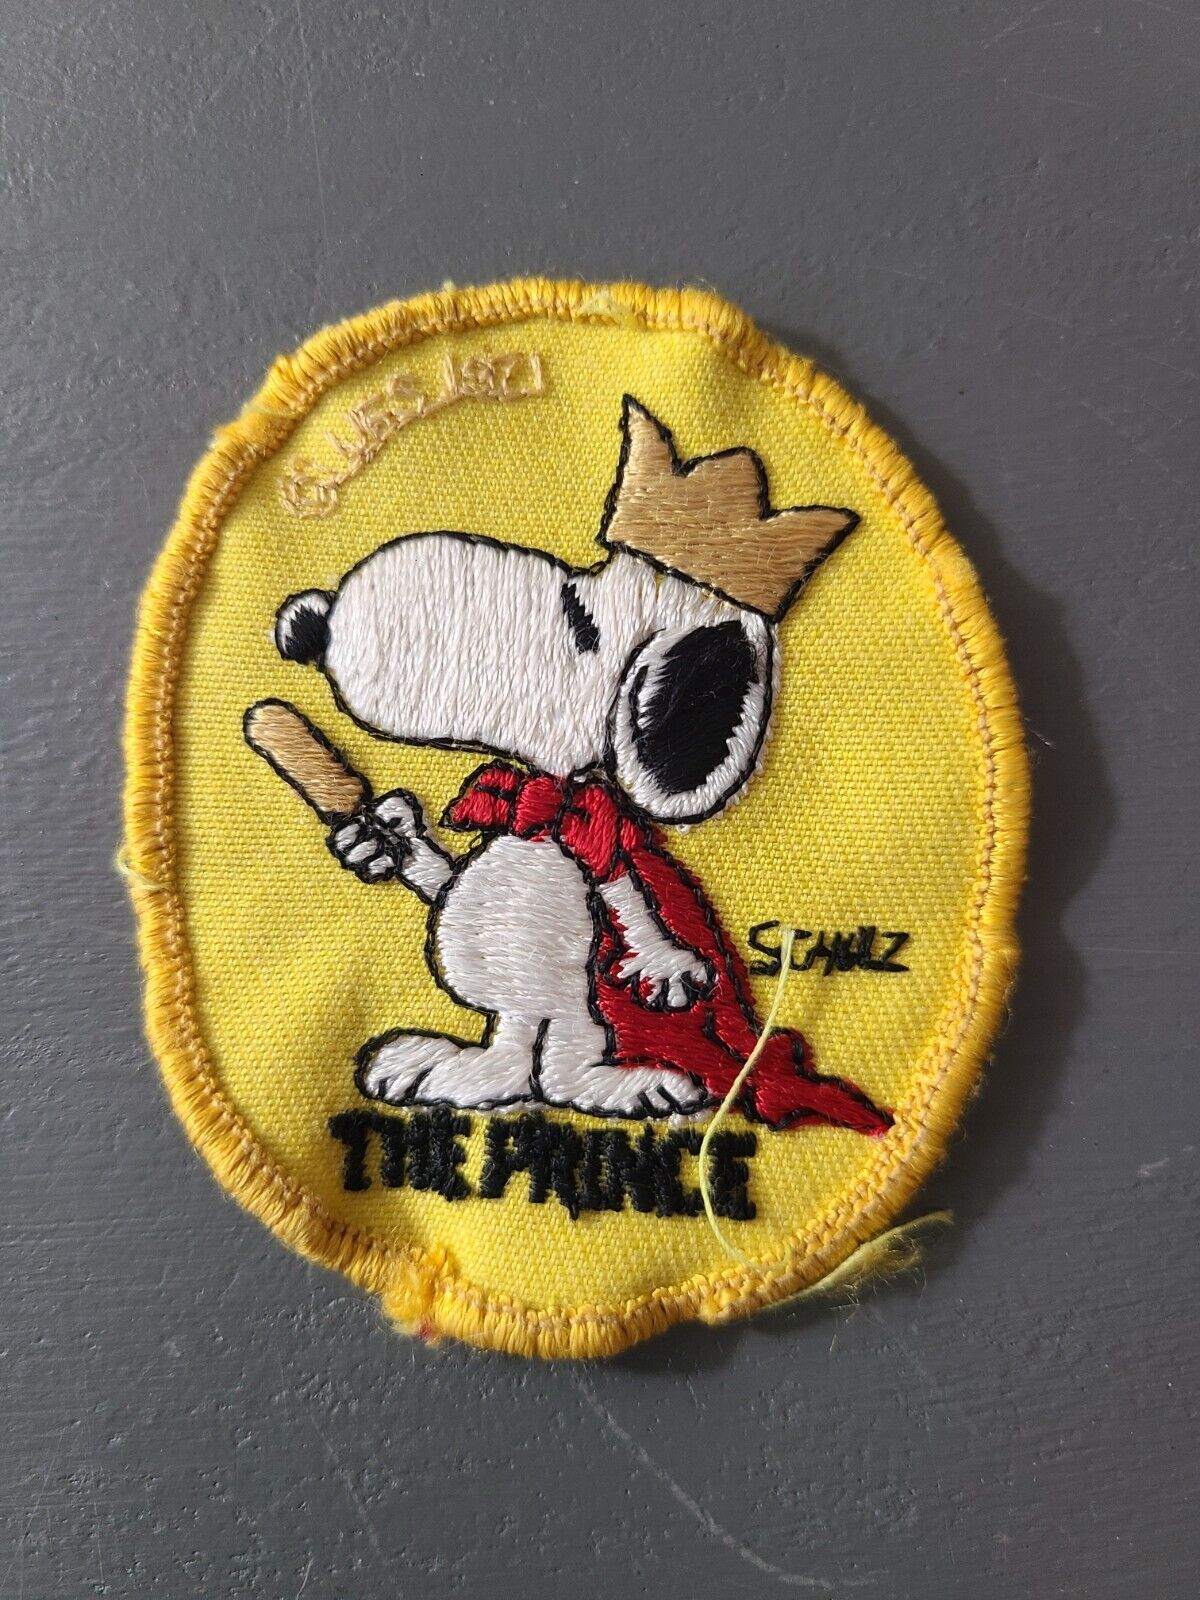 Vintage 1971 Peanuts SNOOPY The Prince Embroidered 3” Yellow Oval Patch Unused